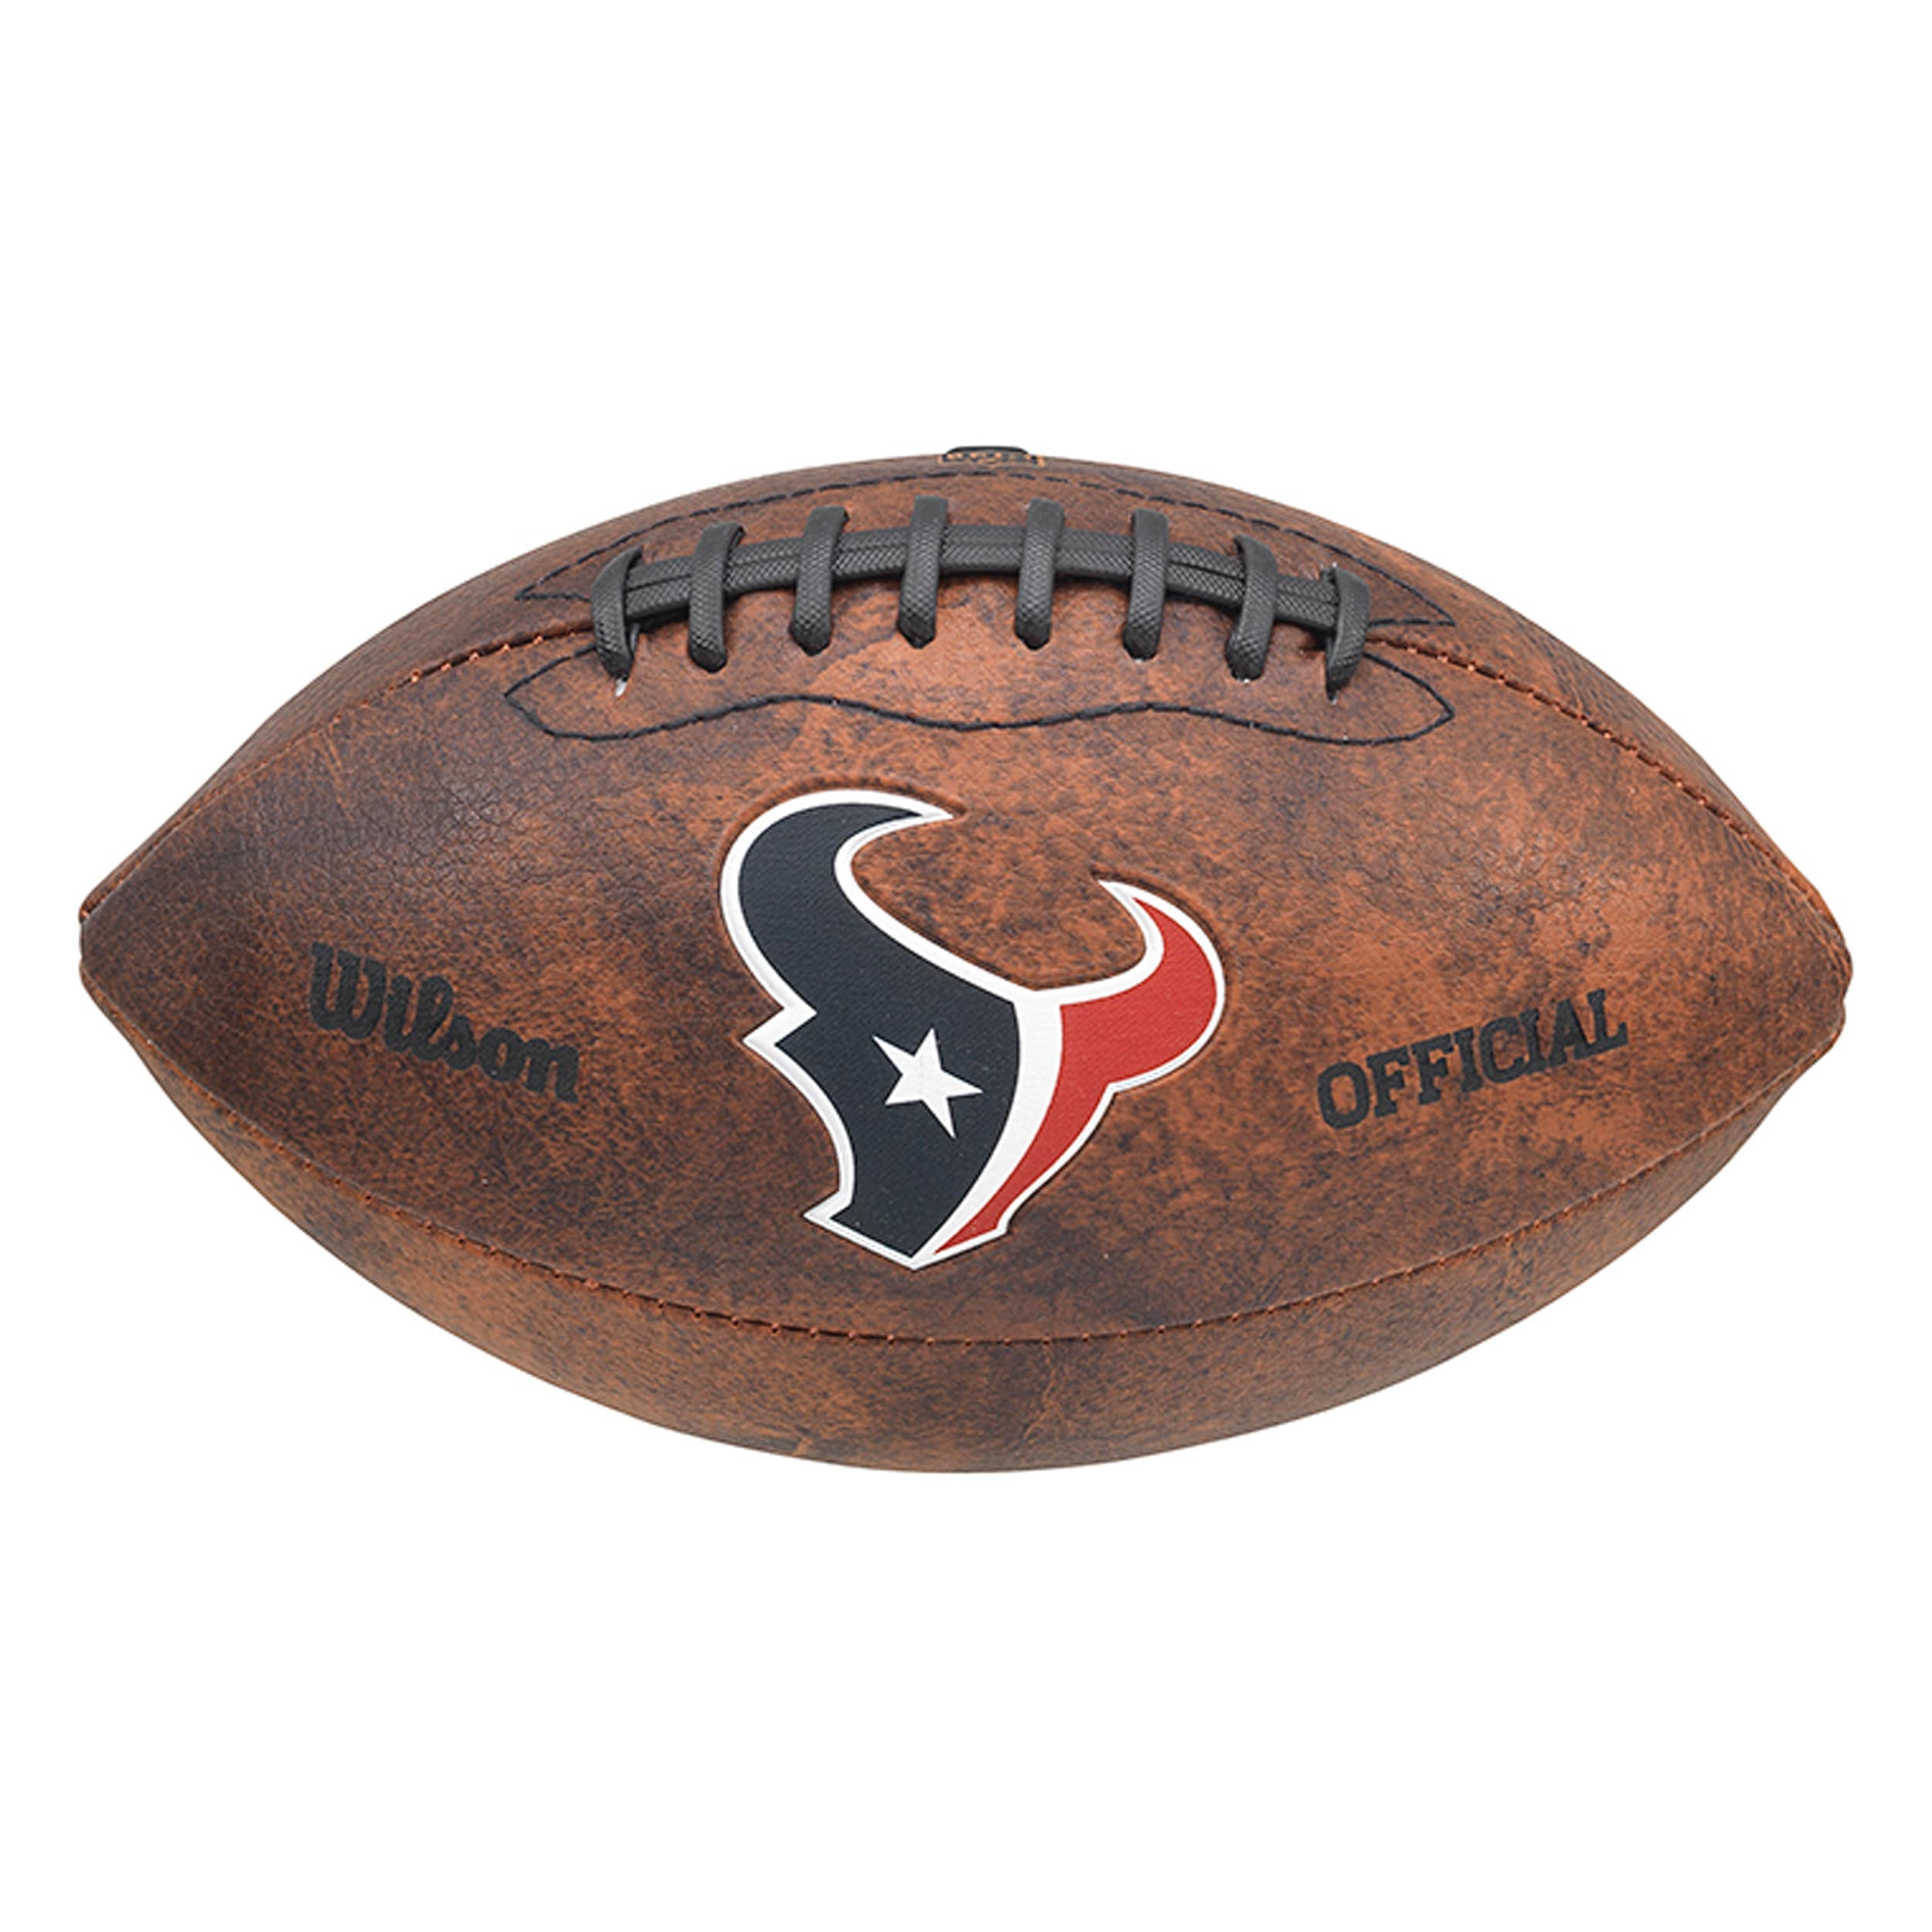 Wilson - NFL 9 Inch Color Throwback Football, Houston Texans - image 2 of 2